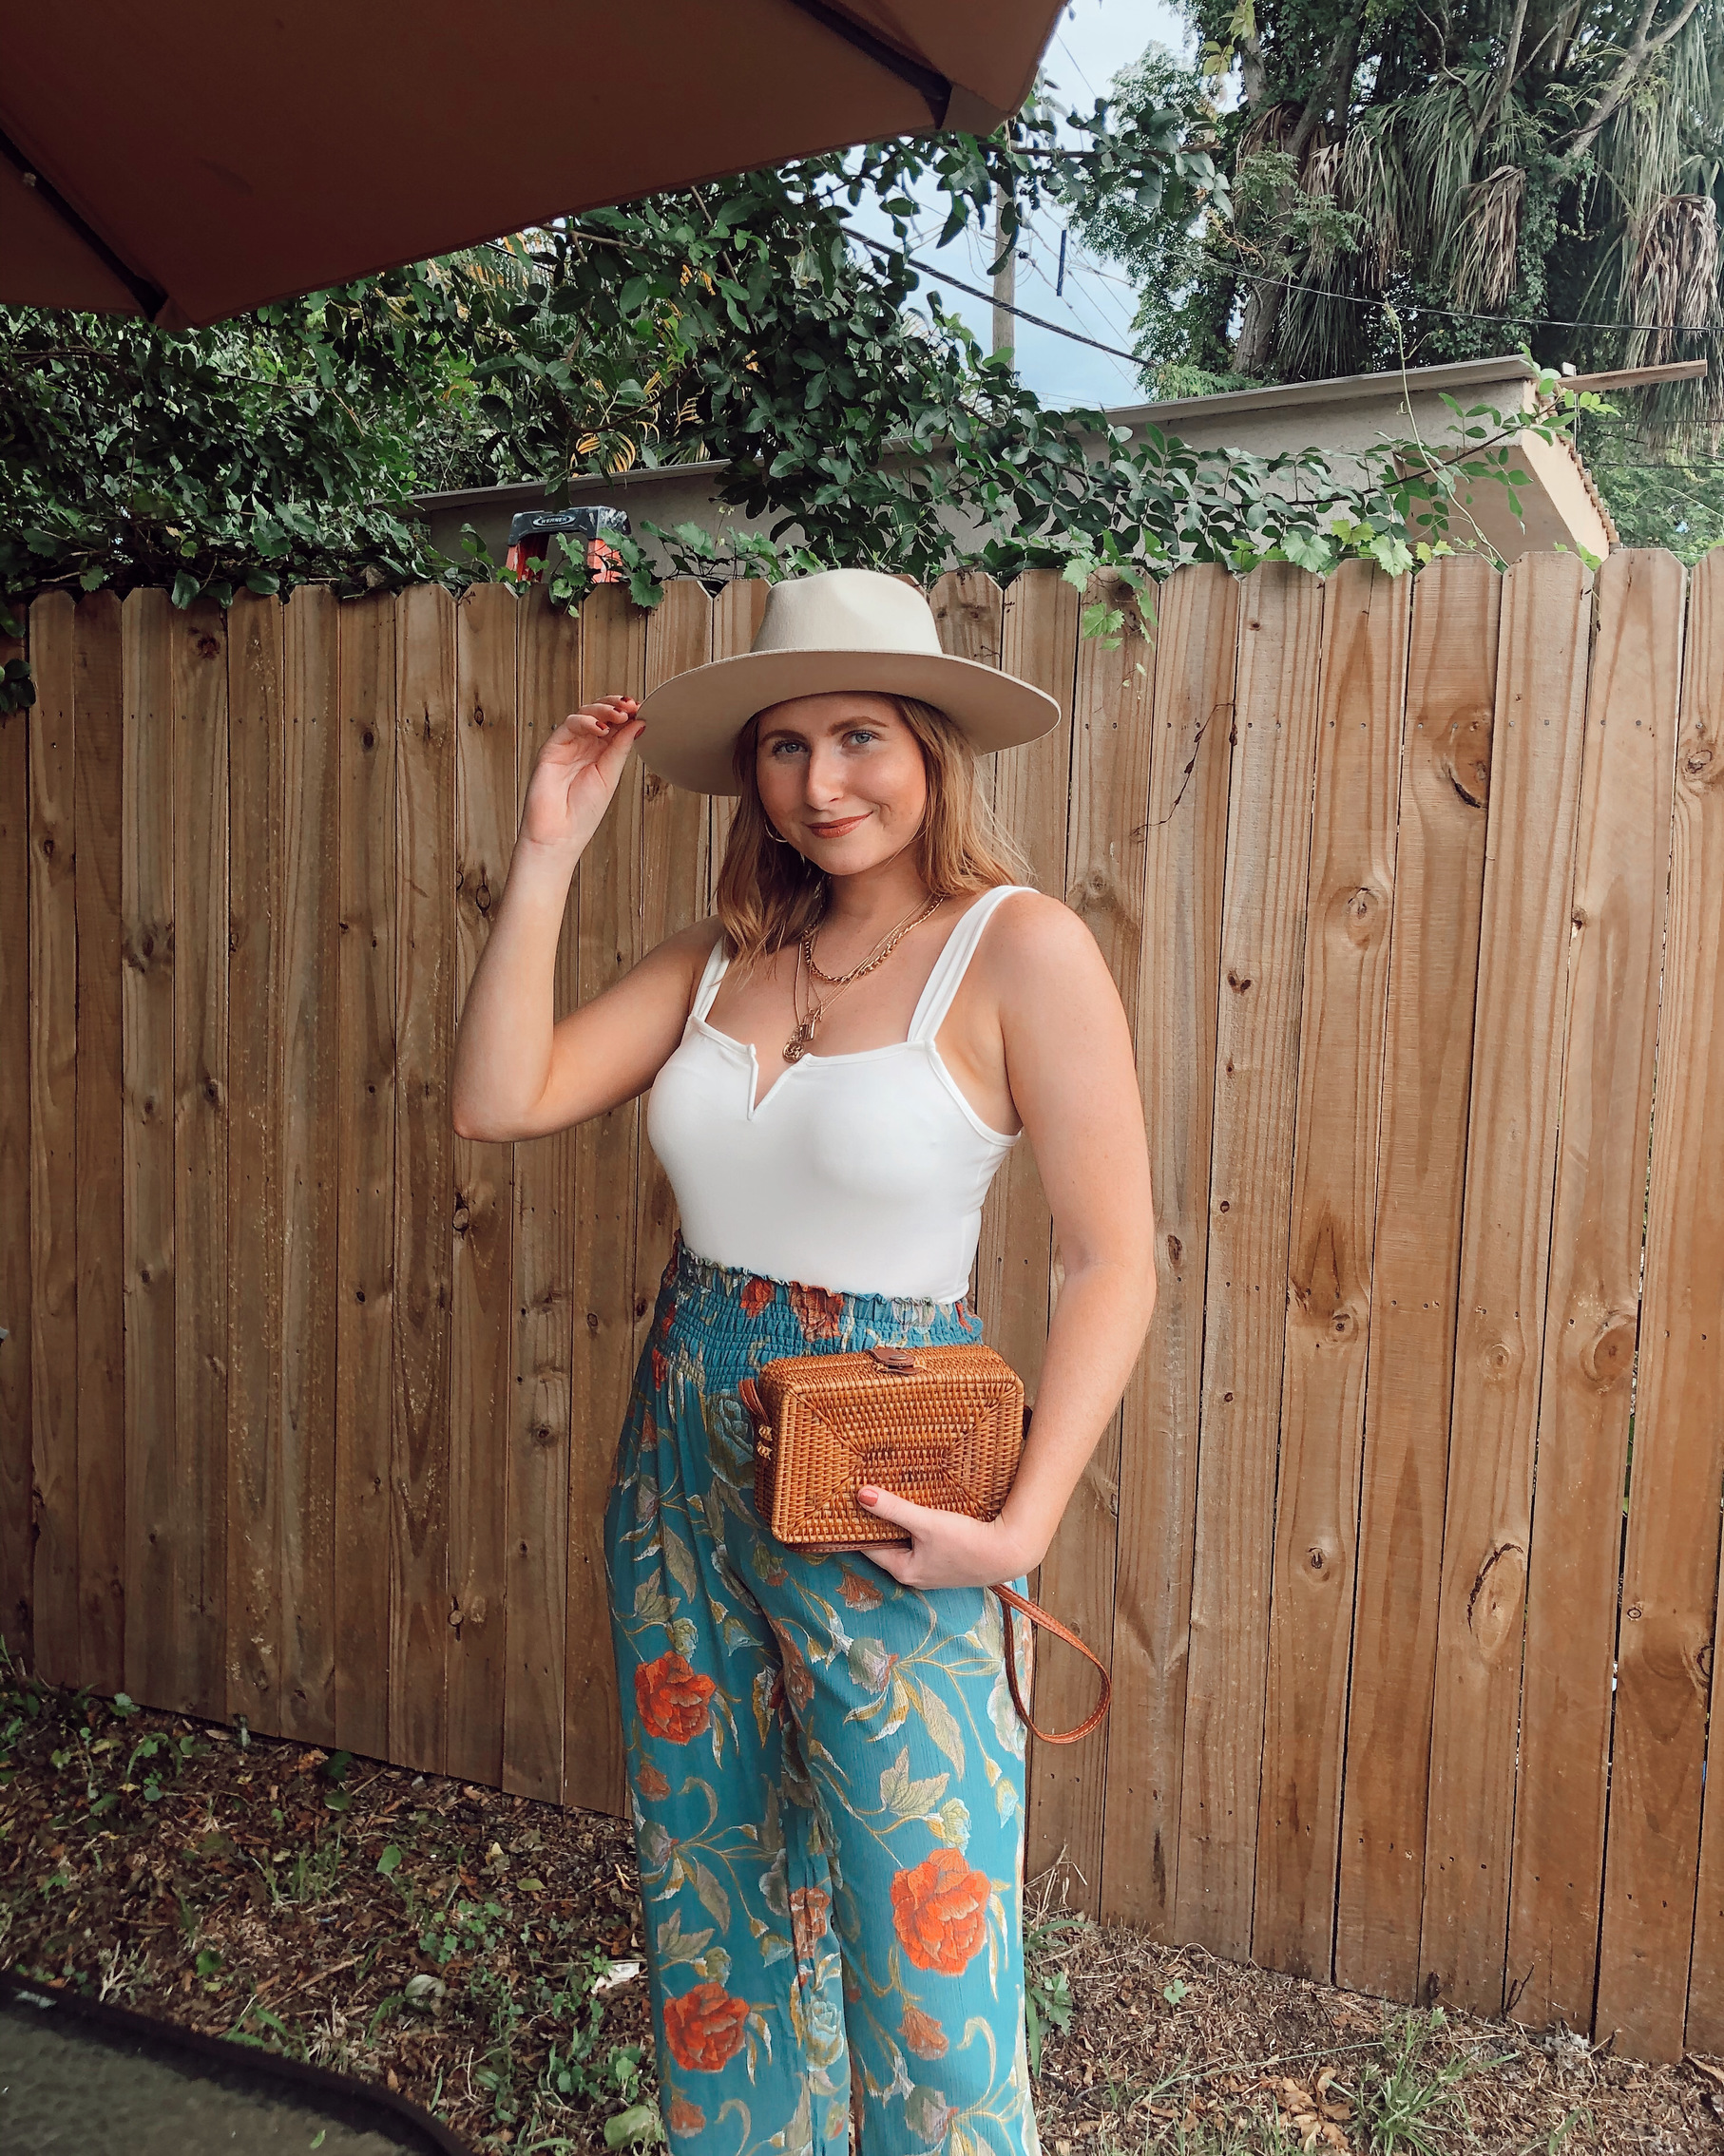 Outfits From Summer to Fall - Juniors' Johnny Floral-Print Pants | V Wire Bodysuit (Ivory) | HAAN Women Handwoven Wicker Rattan Crossbody Rectangle Bag Boho Purse | Summer to Fall Outfits 2020 - Transition Wardrobe from Summer to Fall - Summer to Fall Outfit Ideas 2020 - Cute Fall 2020 Outfit Ideas